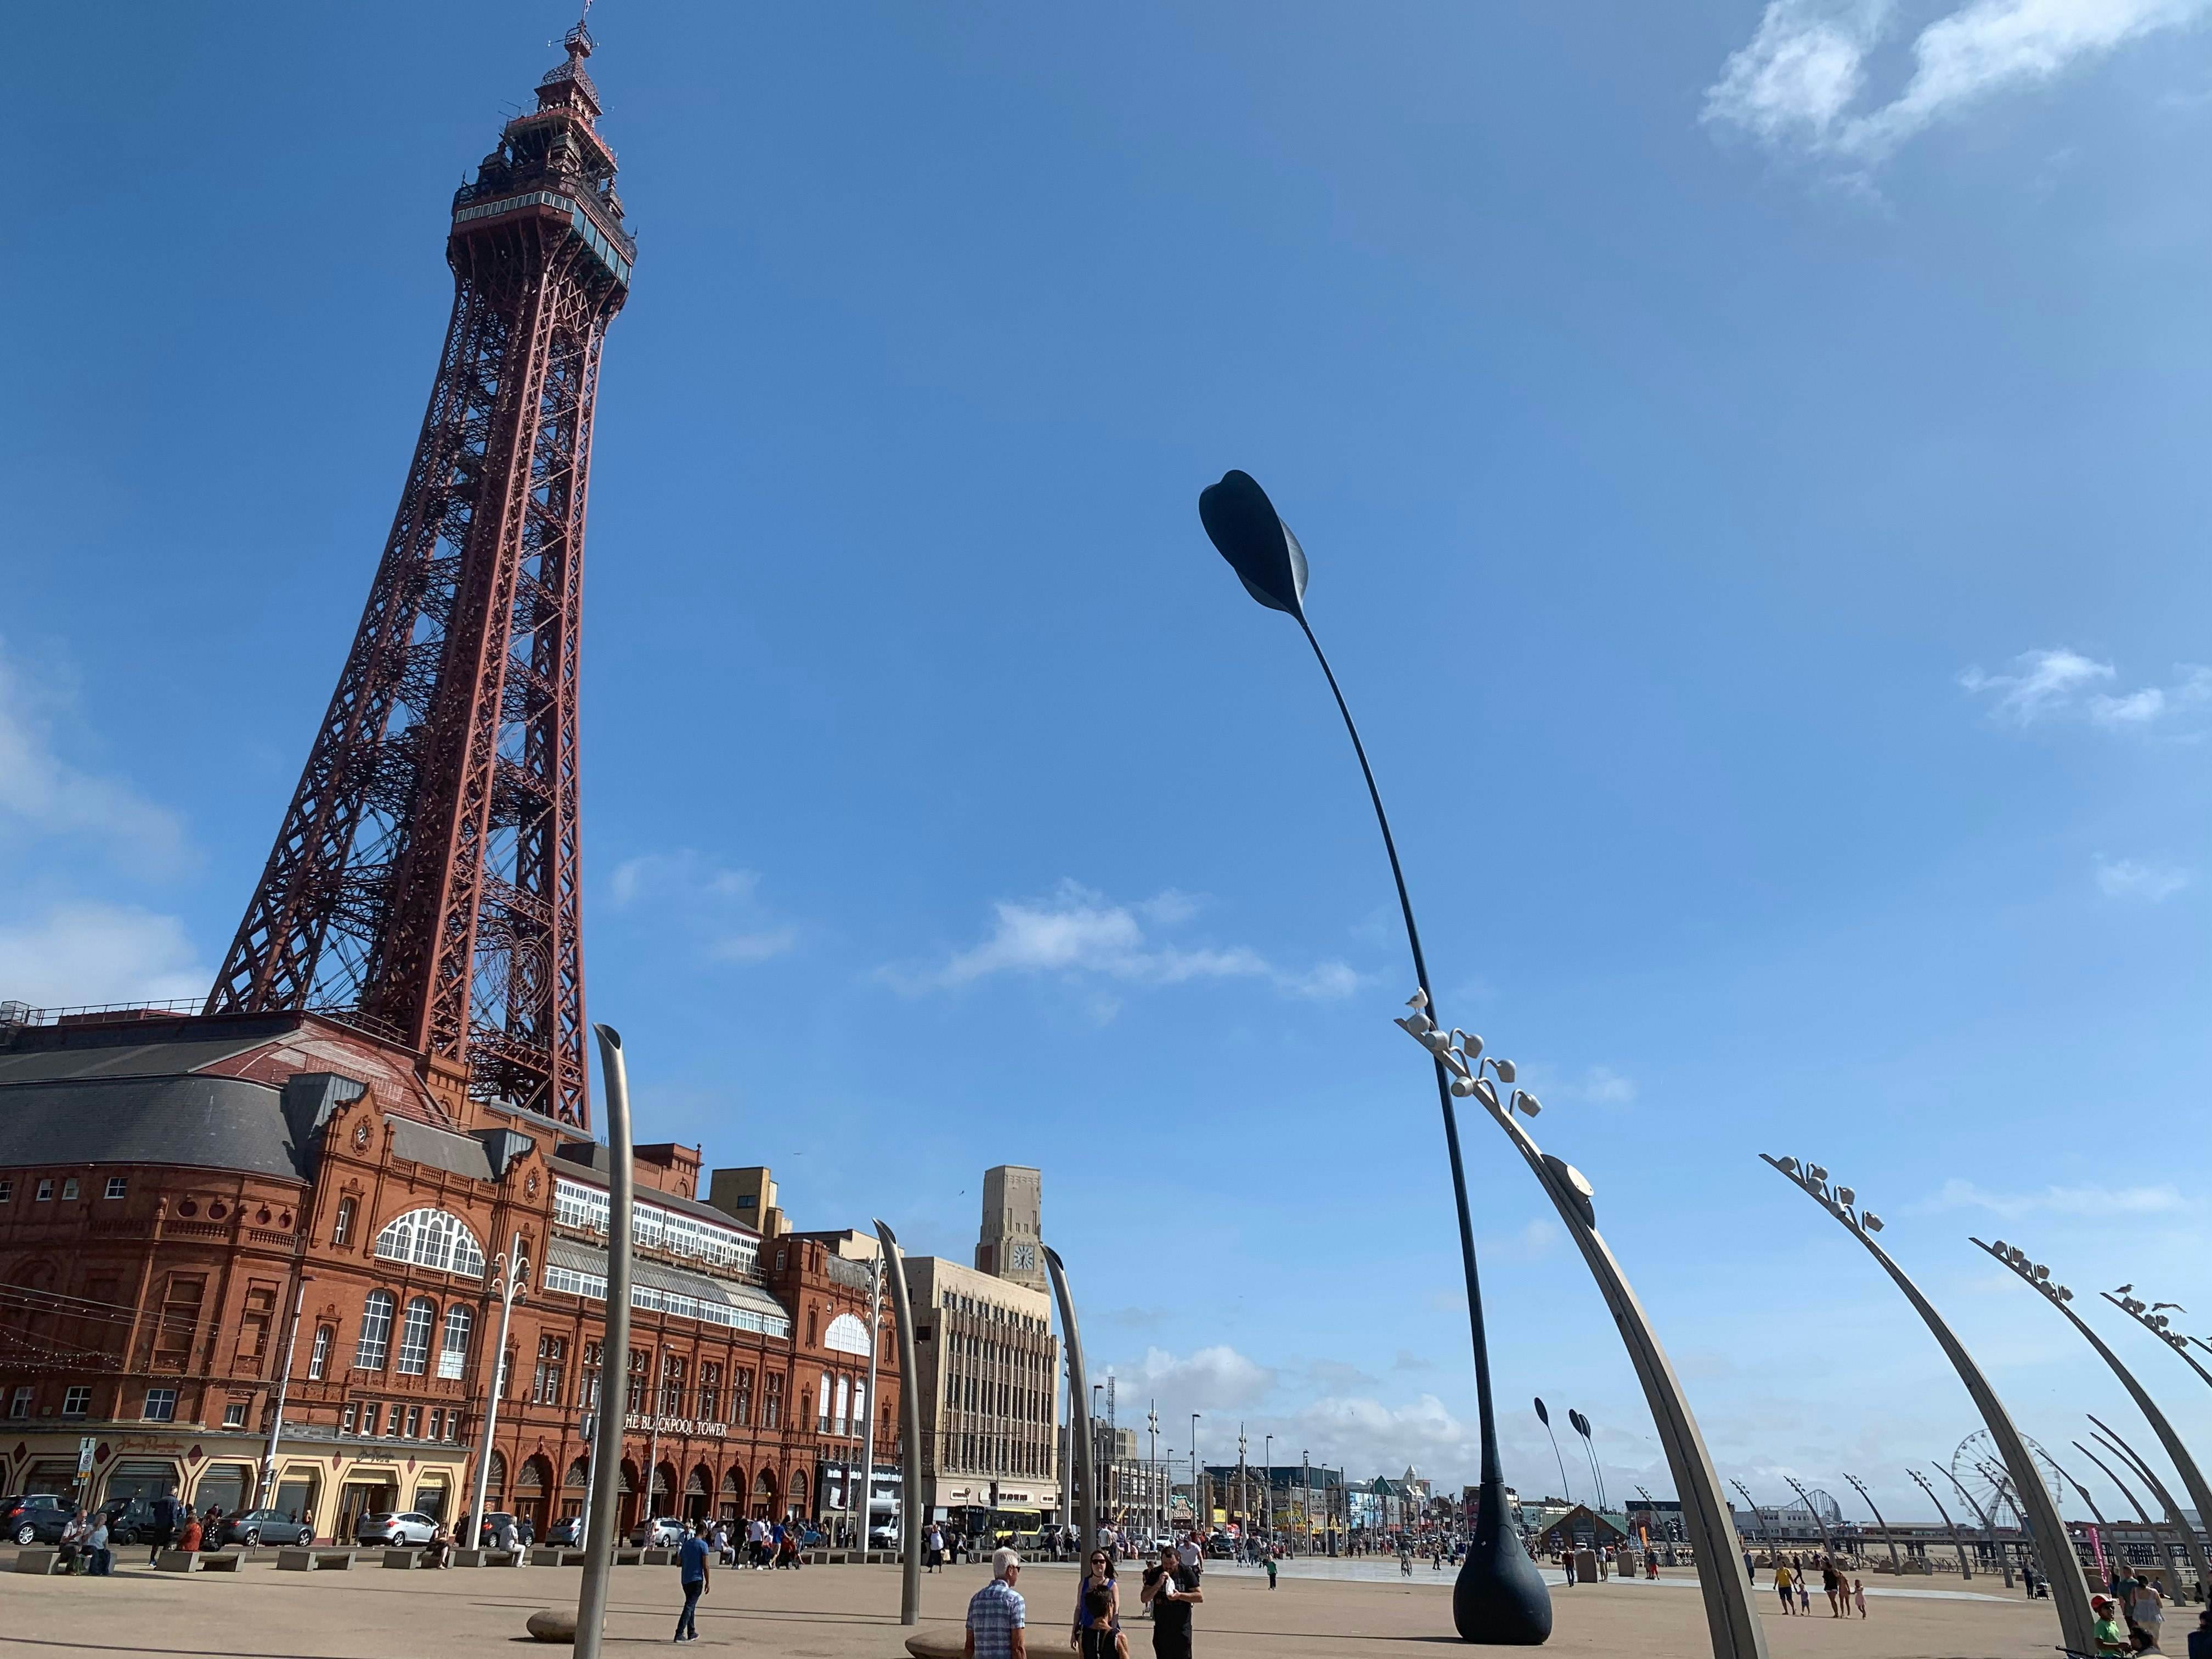 Many people walk along the Promenade by Blackpool Tower on a sunny day.